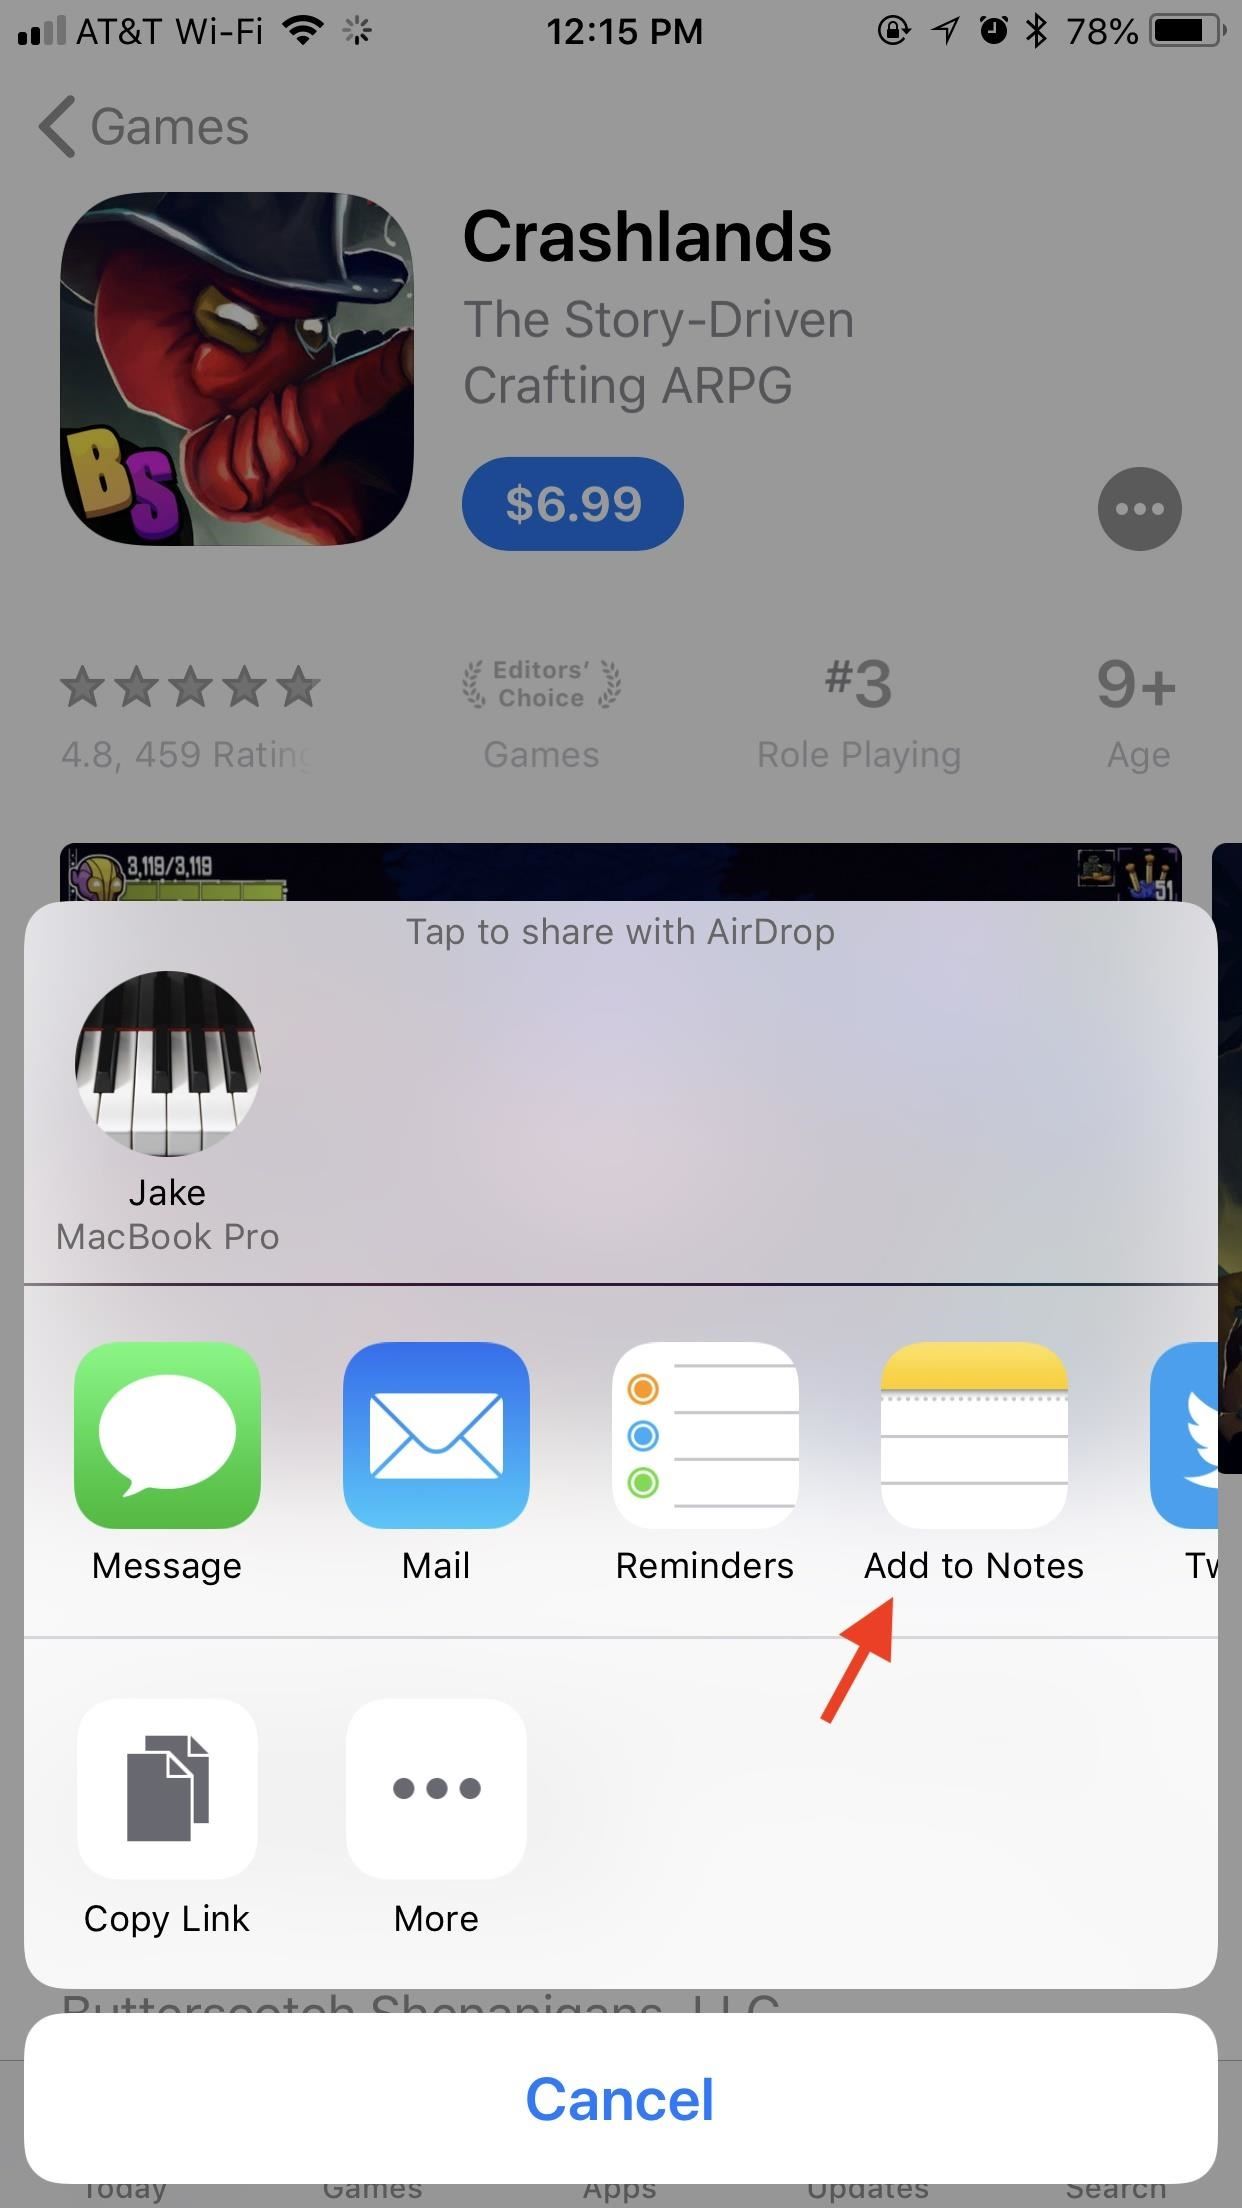 Missing the App Store's Wish List? This Is the Best Alternative